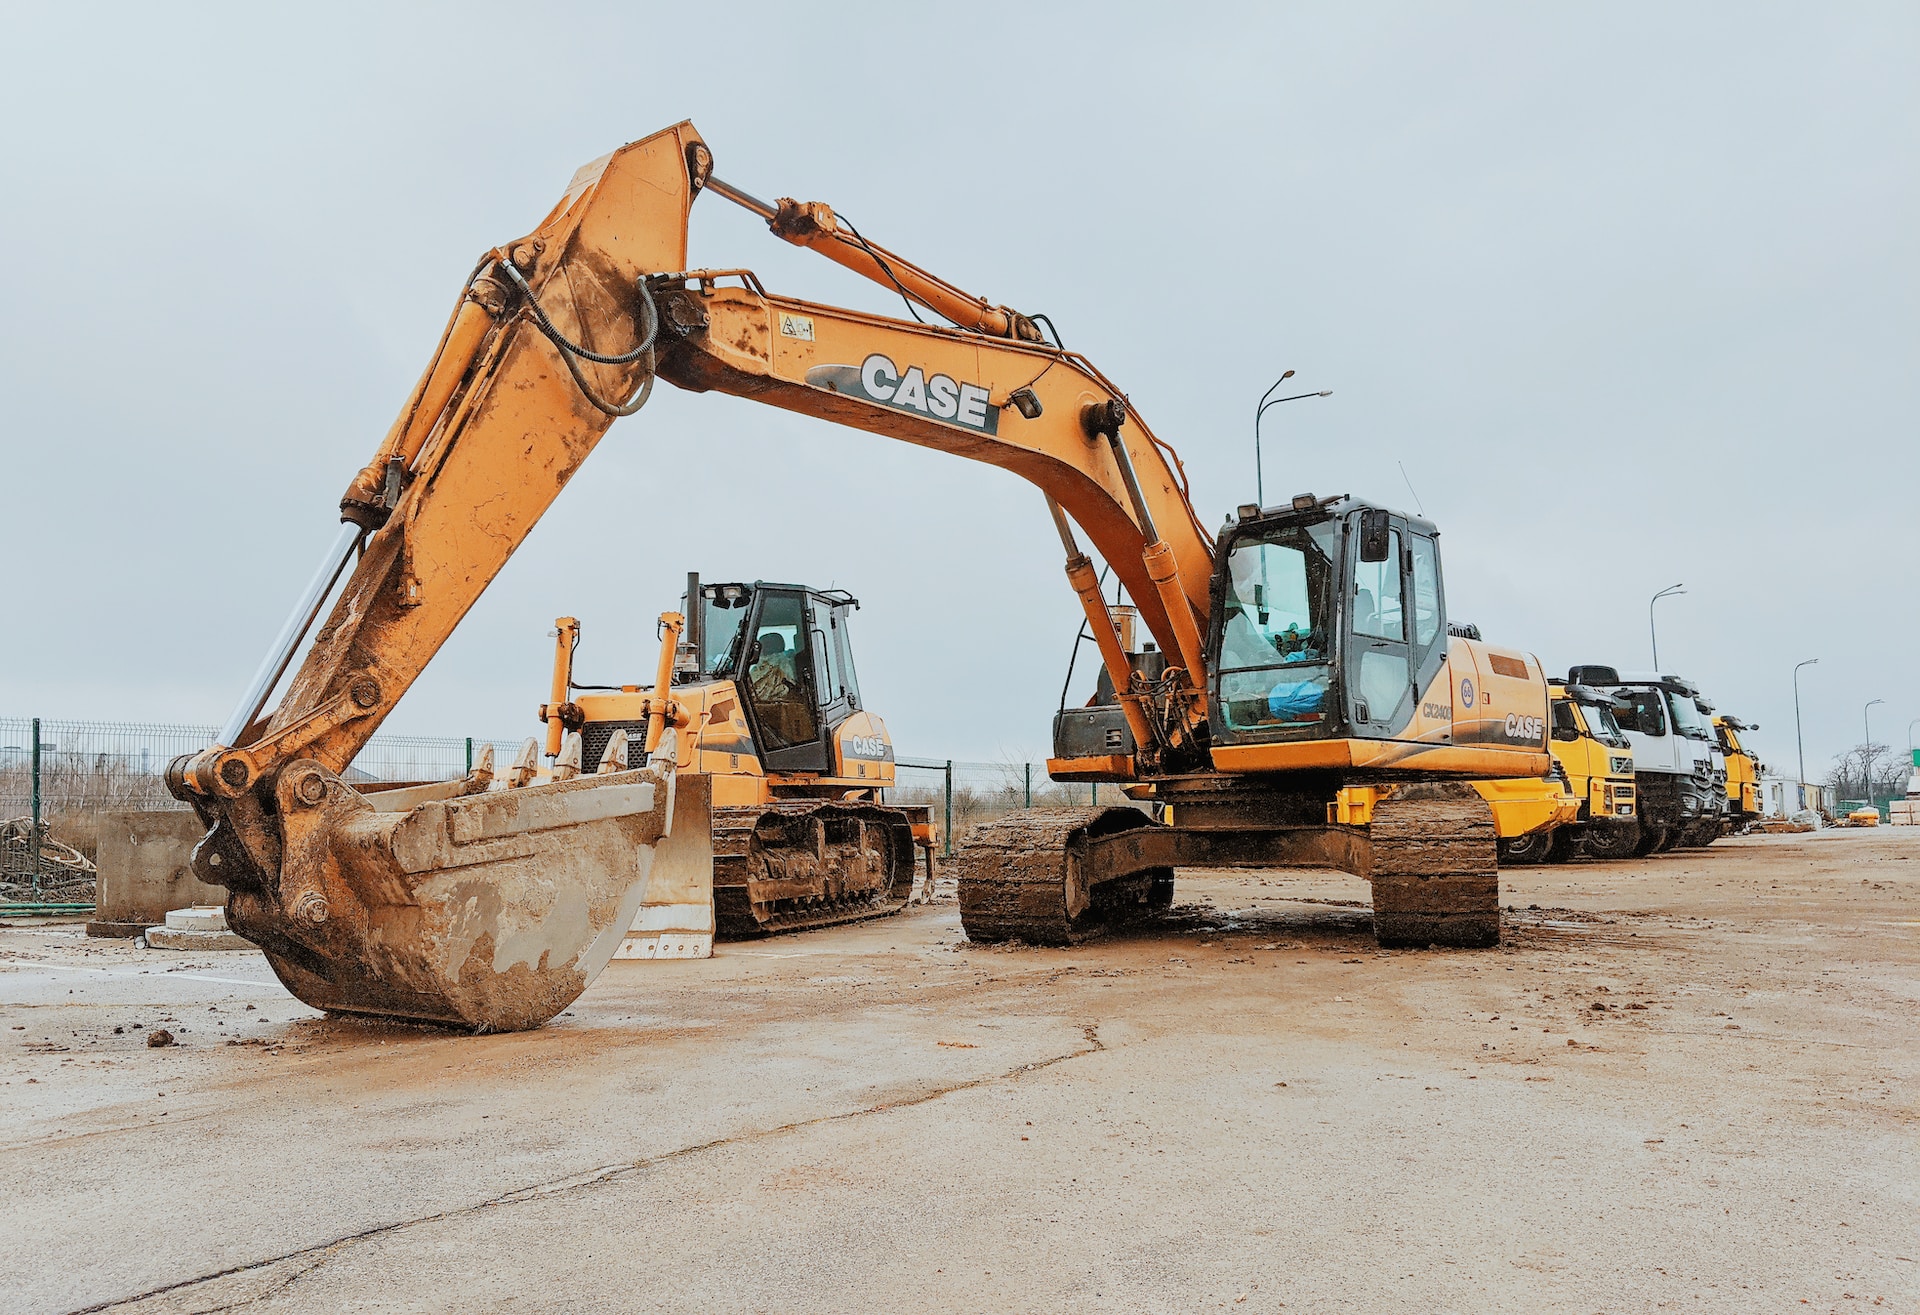 Skid Steers vs. Track Loaders: What Are the Differences?